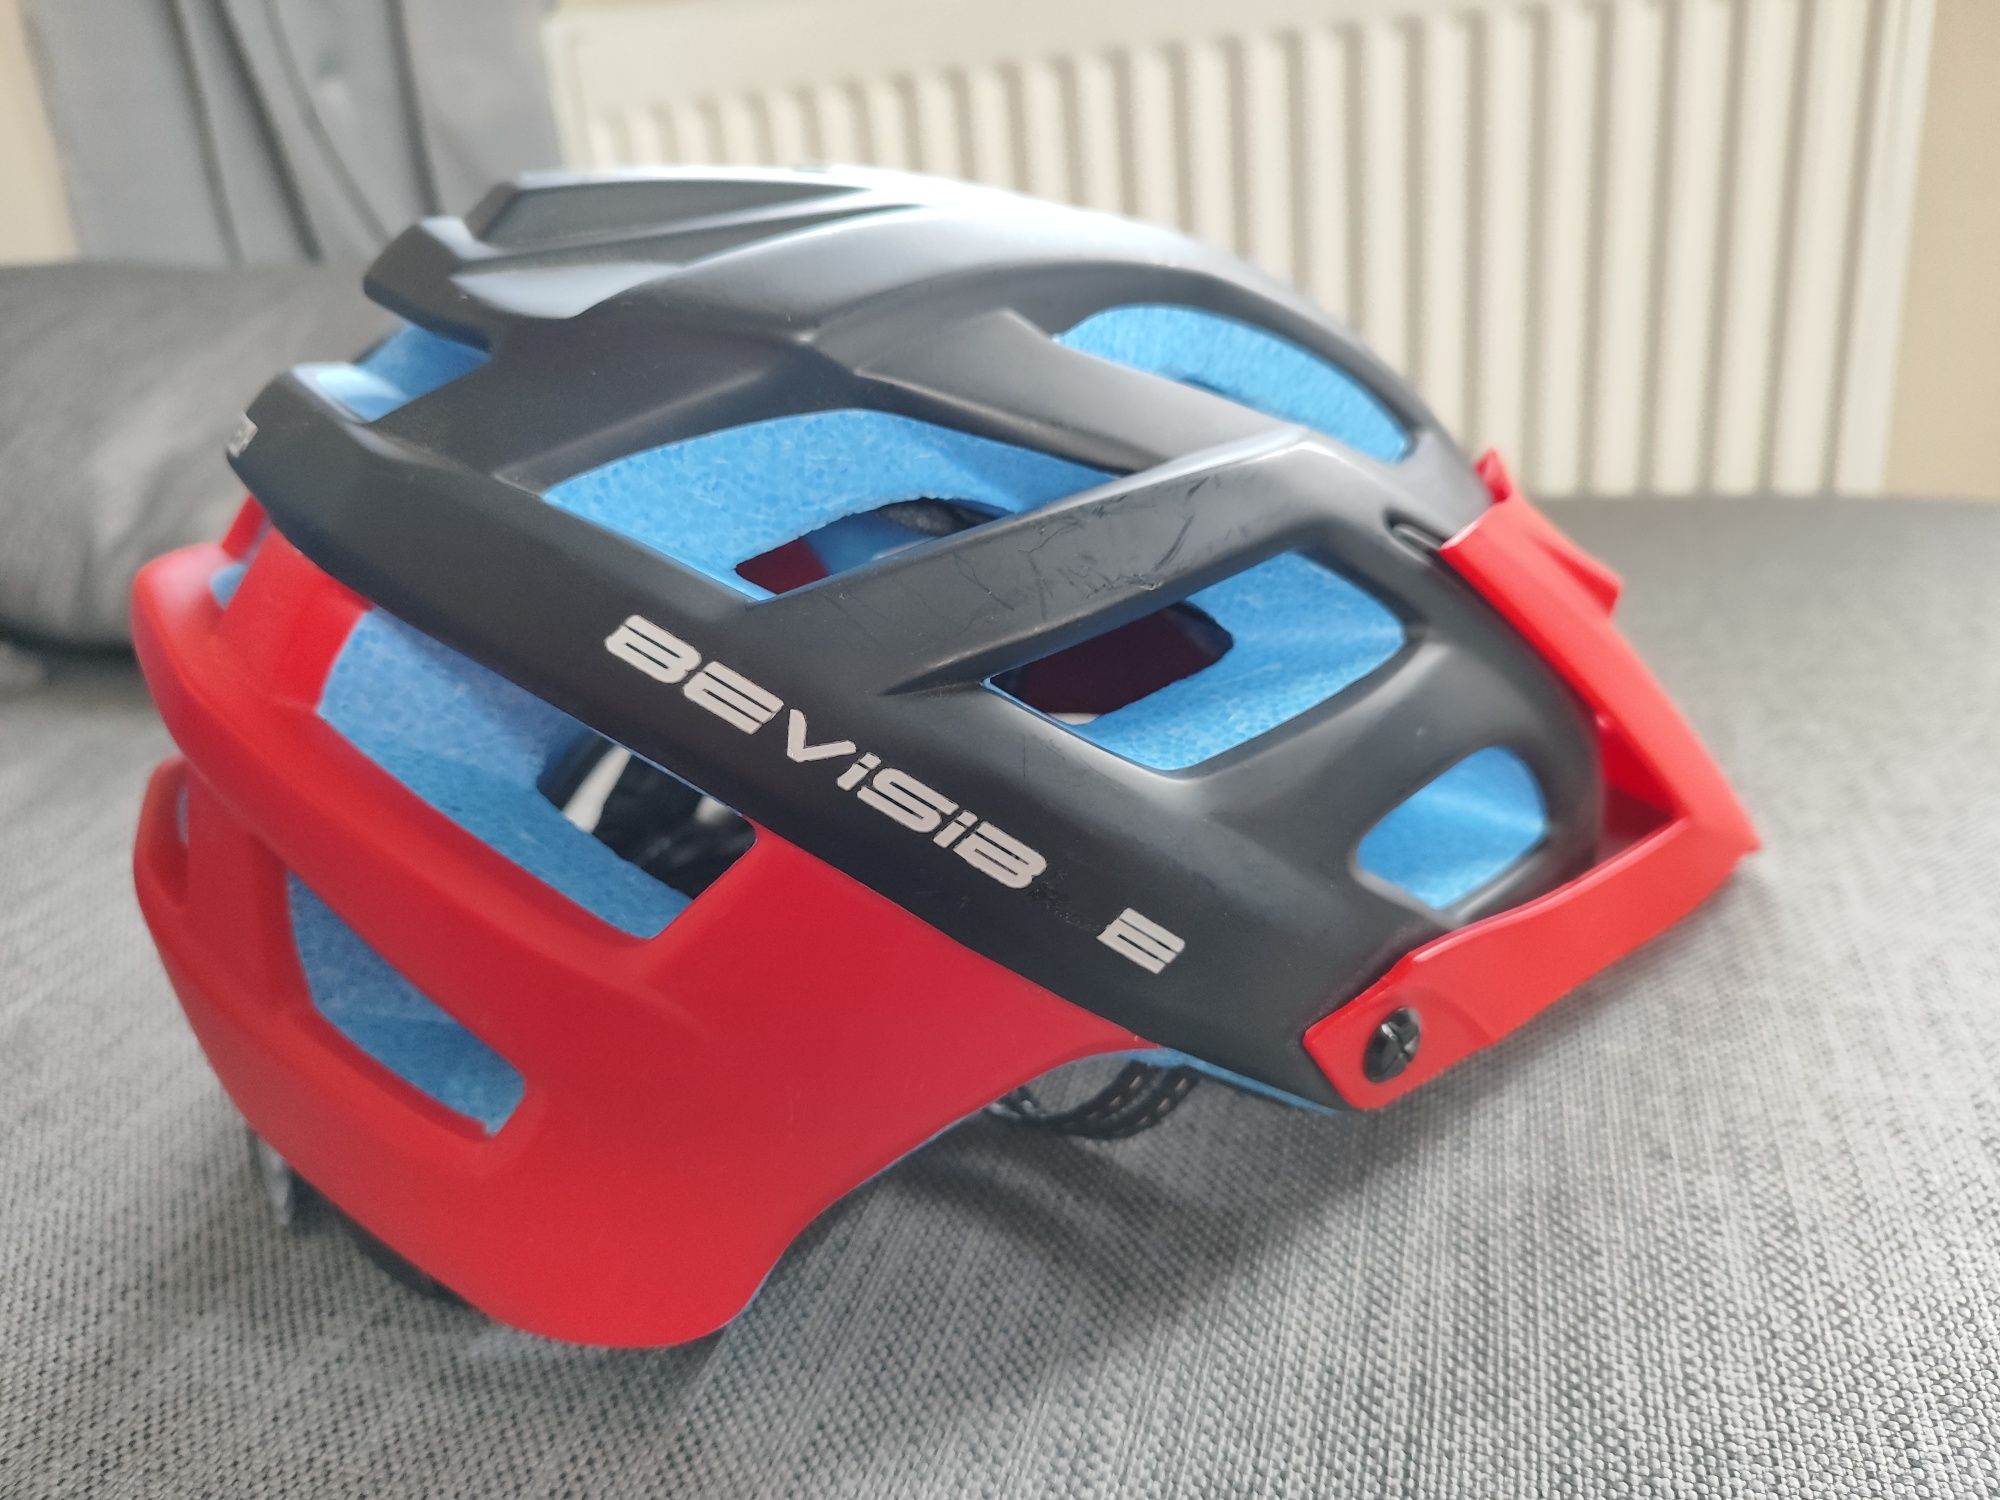 Kask rowerowy Bevisible (nowy)